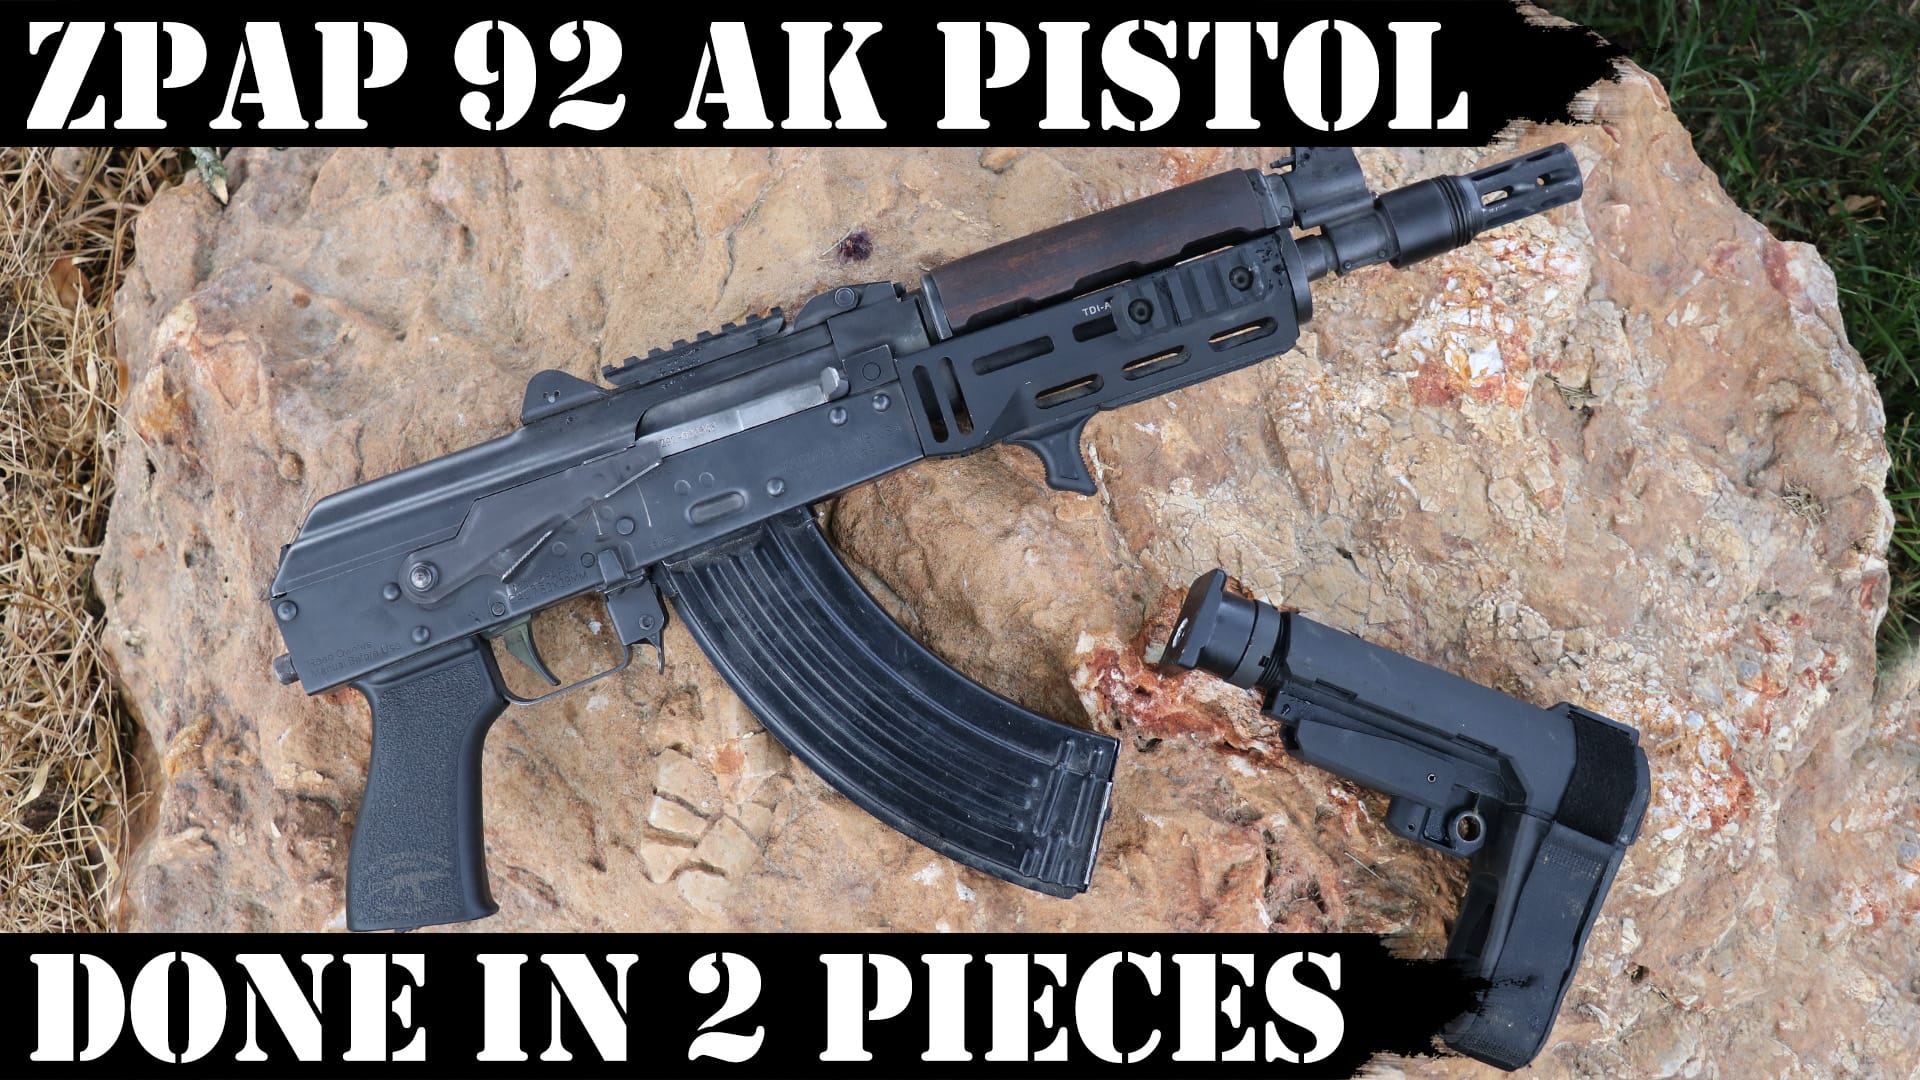 ZPAP92 AK Pistol – Done in 2 Pieces! 5,000 Rounds Later!